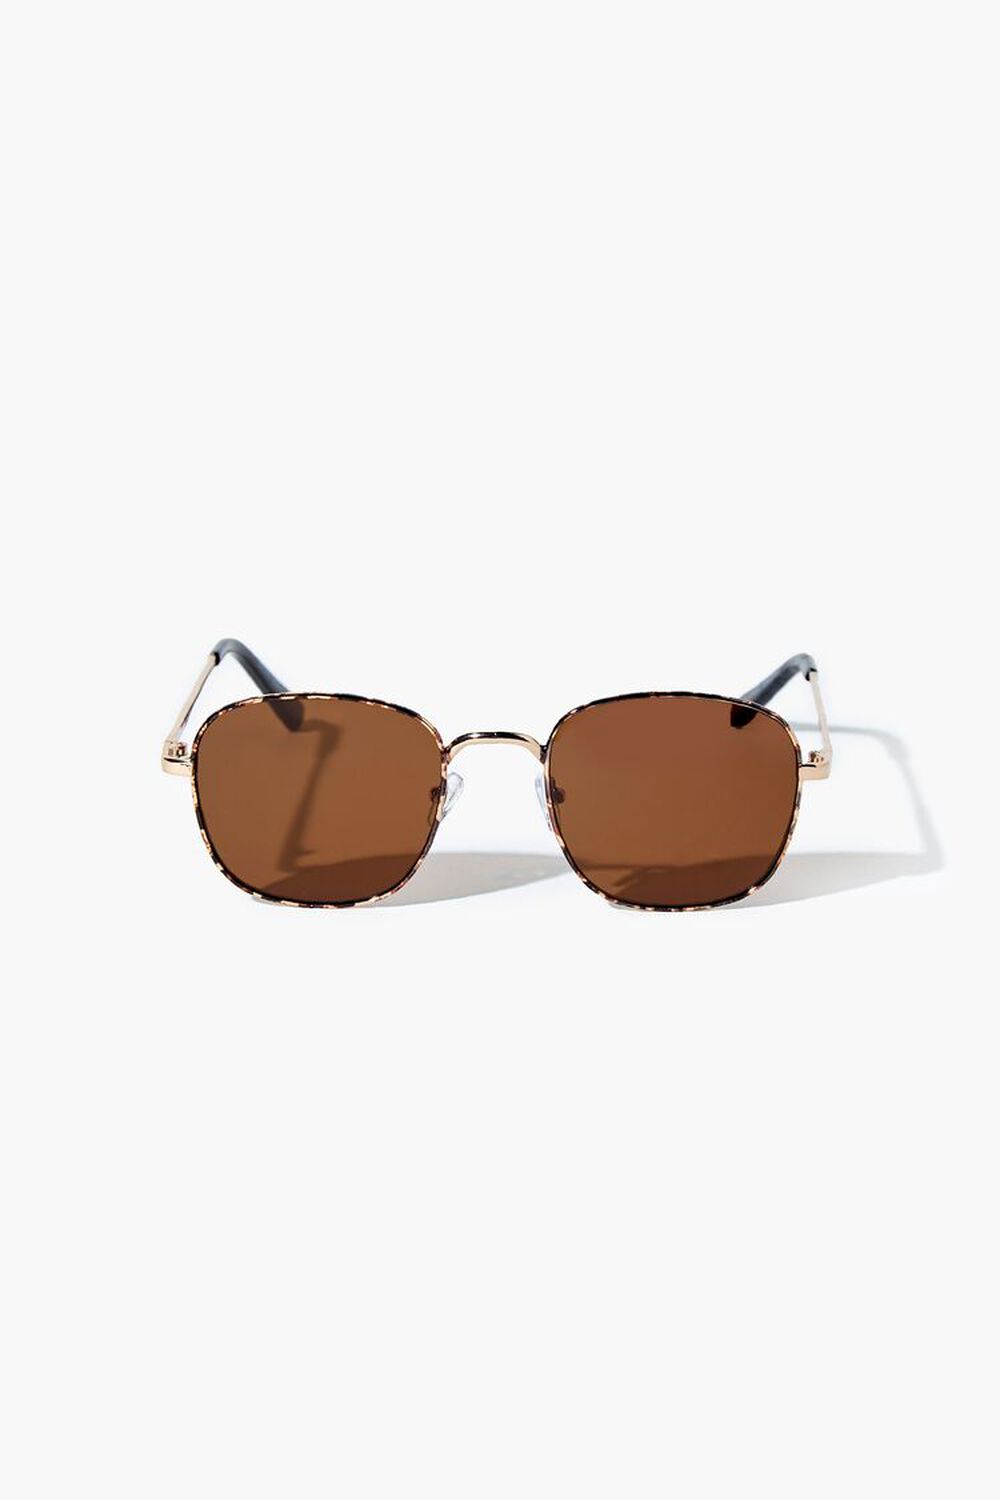 BROWN/BROWN Round Frame Sunglasses, image 1